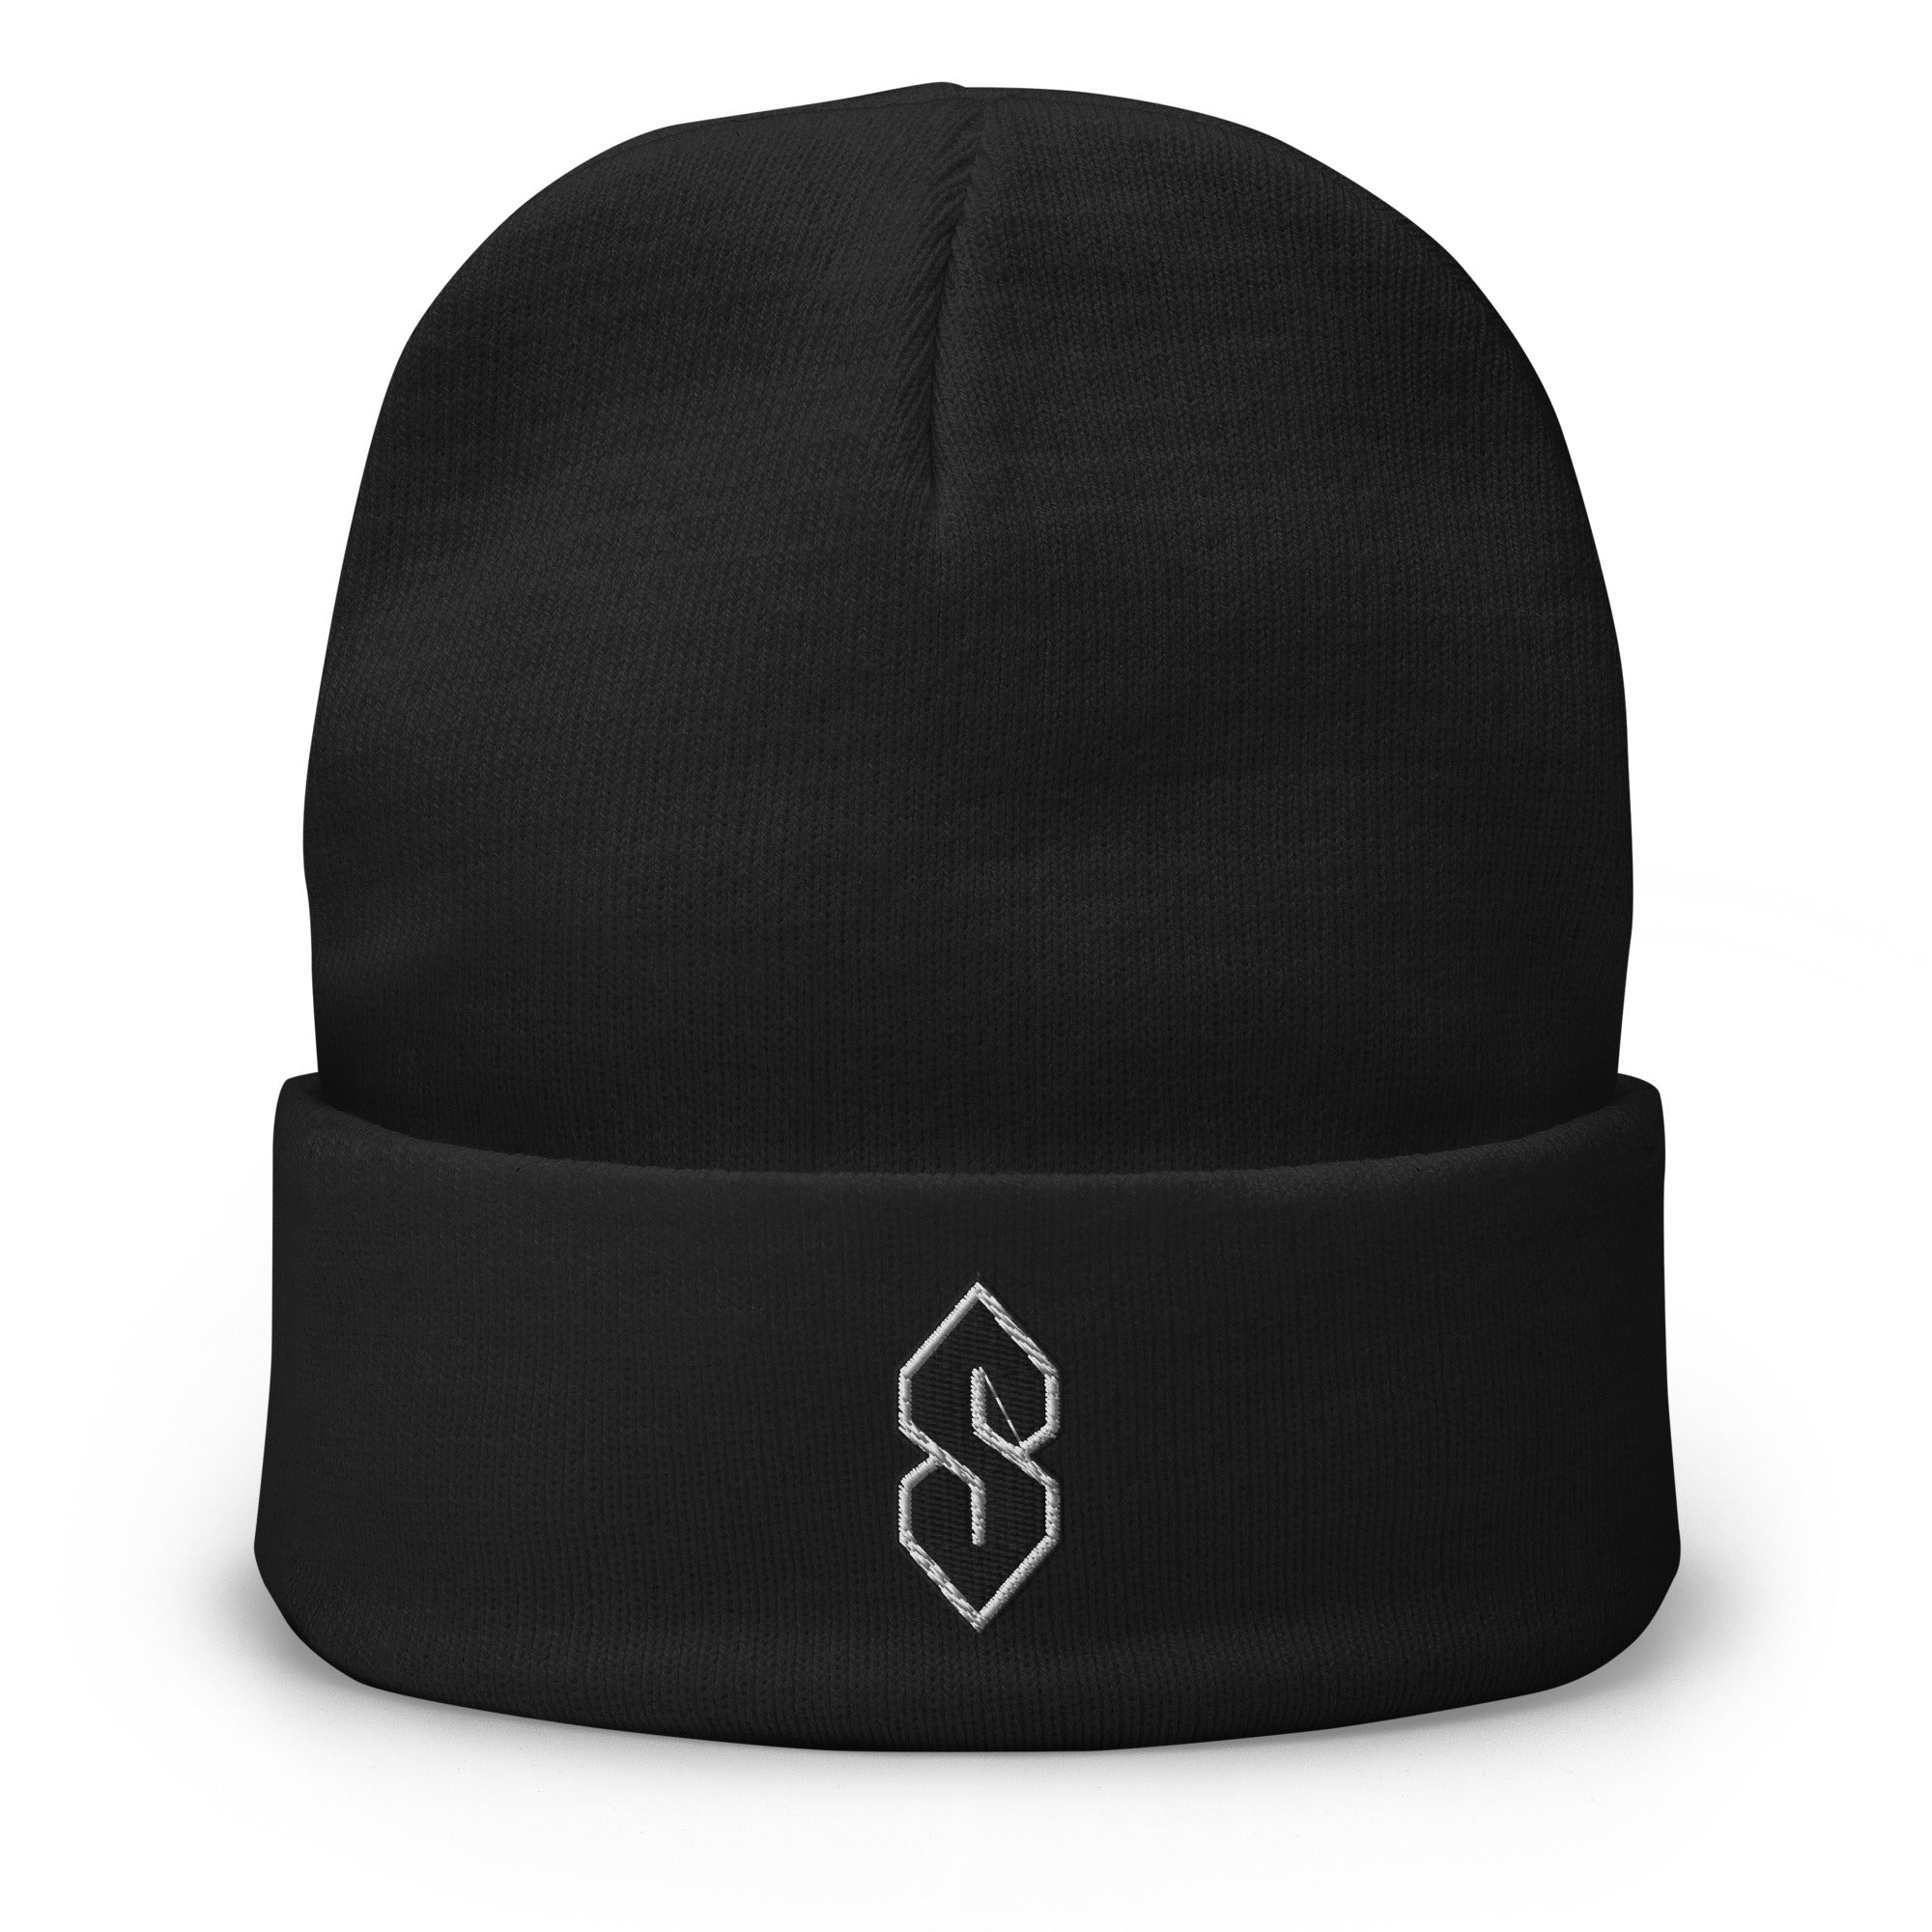 Cool S, Graffiti S, Middle School S Embroidered Cuff Beanie Black Thread - Edge of Life Designs